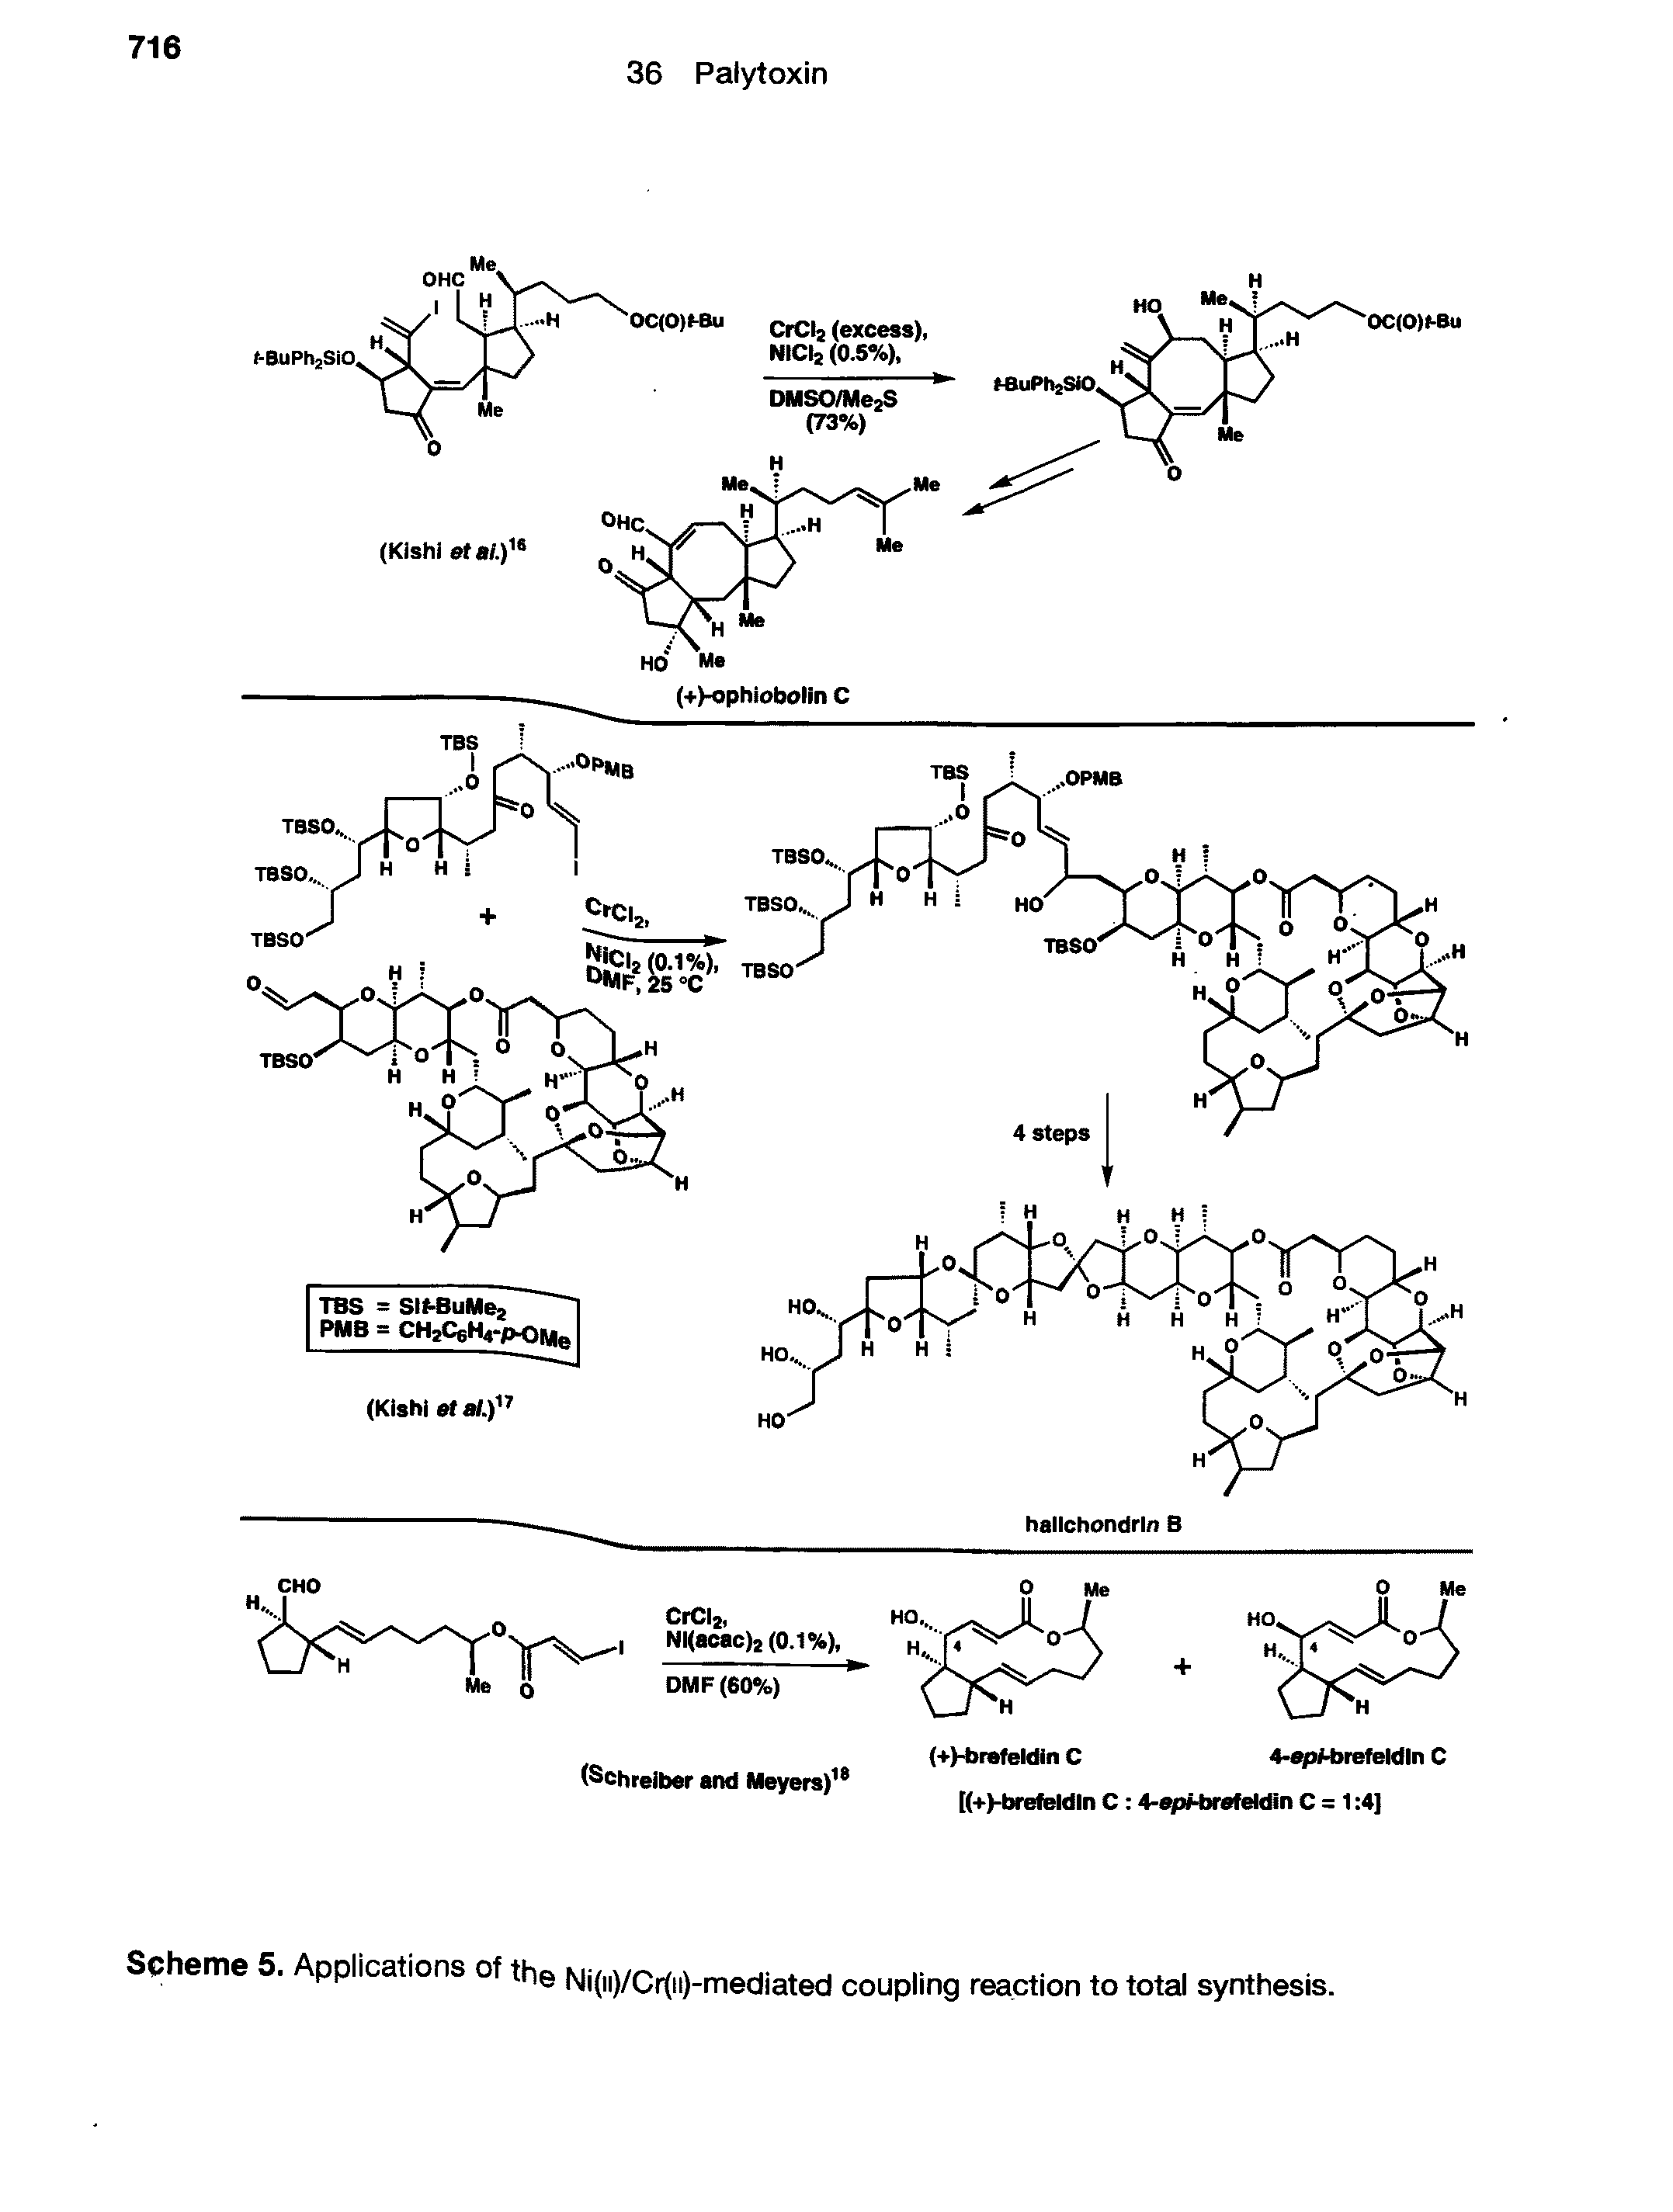 Scheme 5. Applications of the Ni(u)/Cr(ii)-mediated coupling reaction to total synthesis.